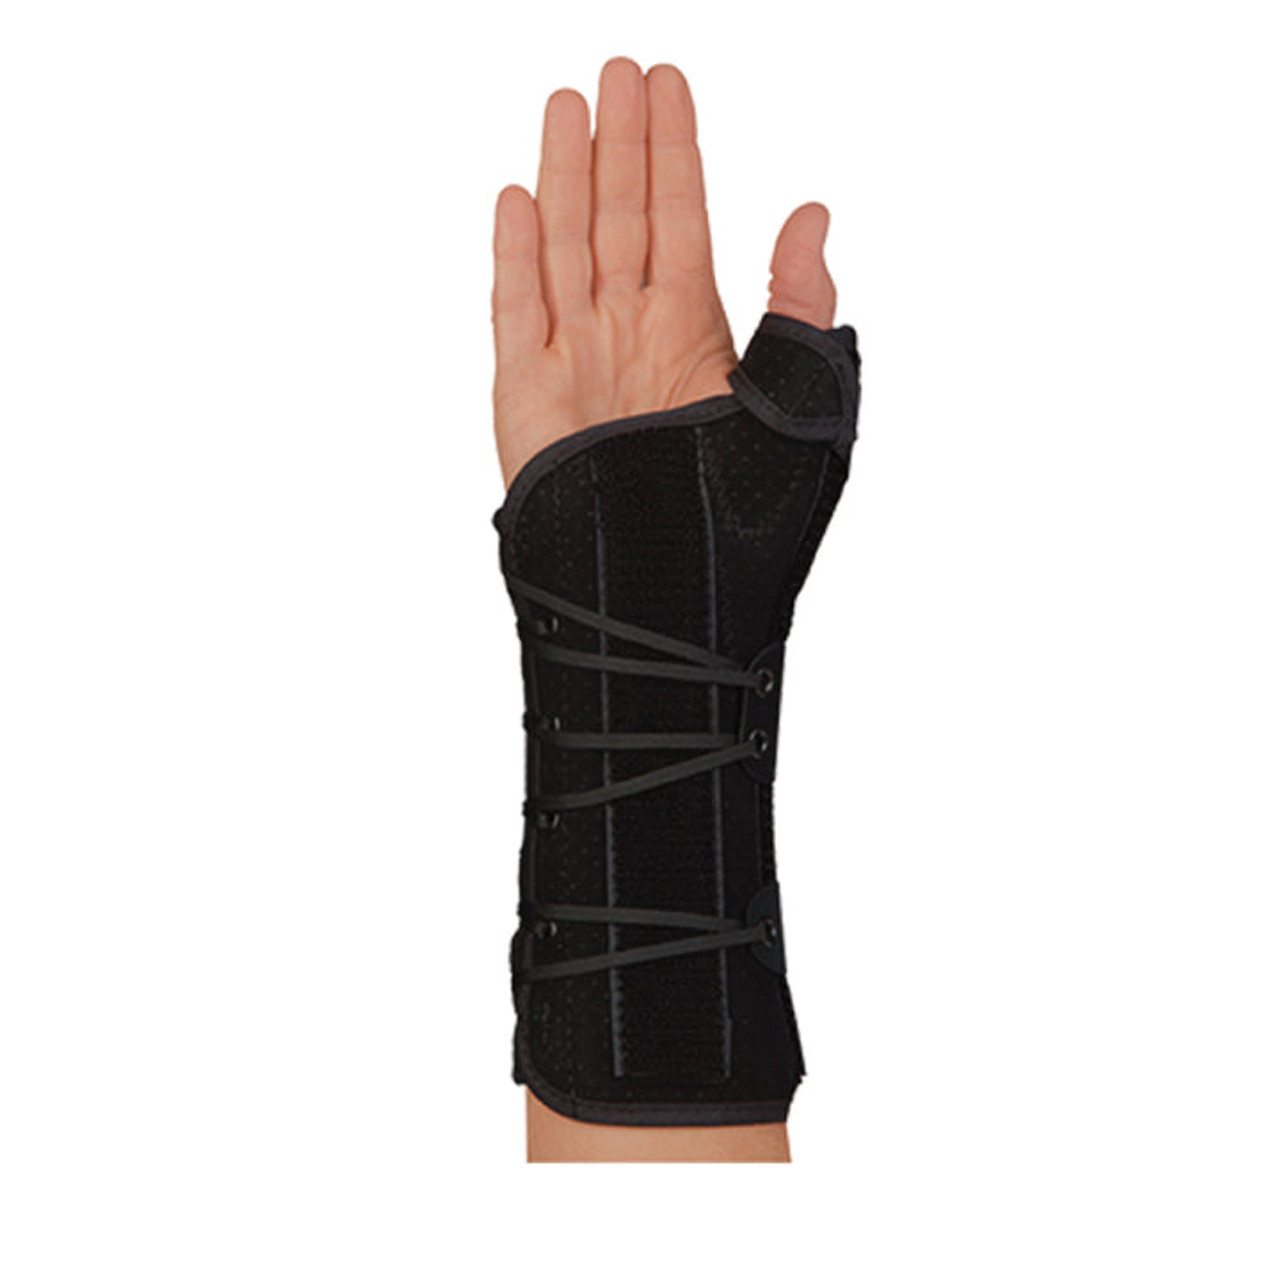 RYNO LACER II WRIST/THUMB LONG BLACK - RIGHT MED, 223724